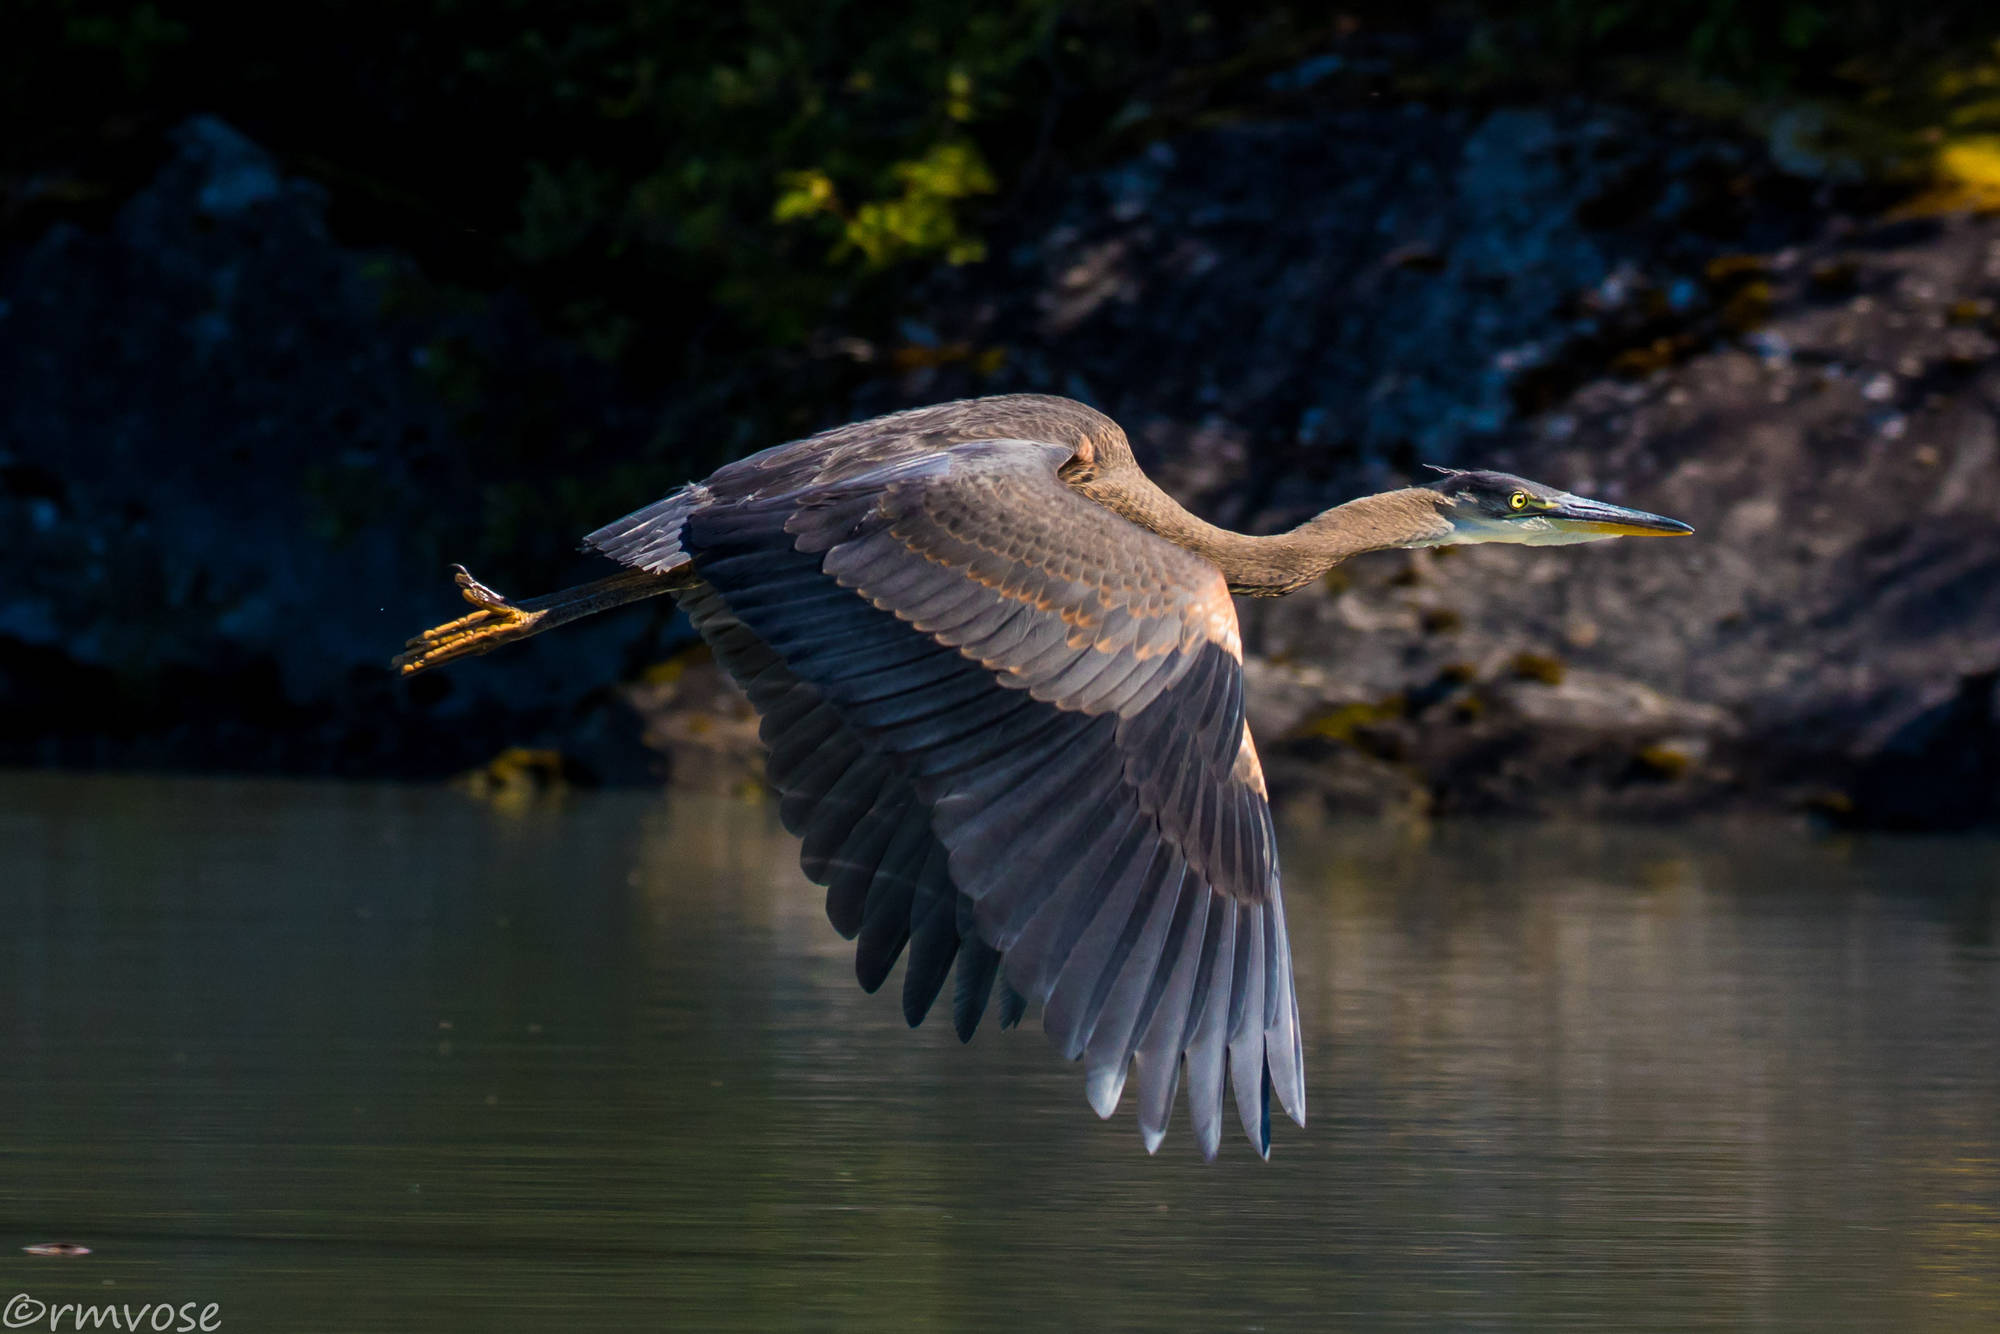 A Great Blue Heron flies between ponds at Mendenhall Glacier on Aug. 7. (Photo by Gina Vose)